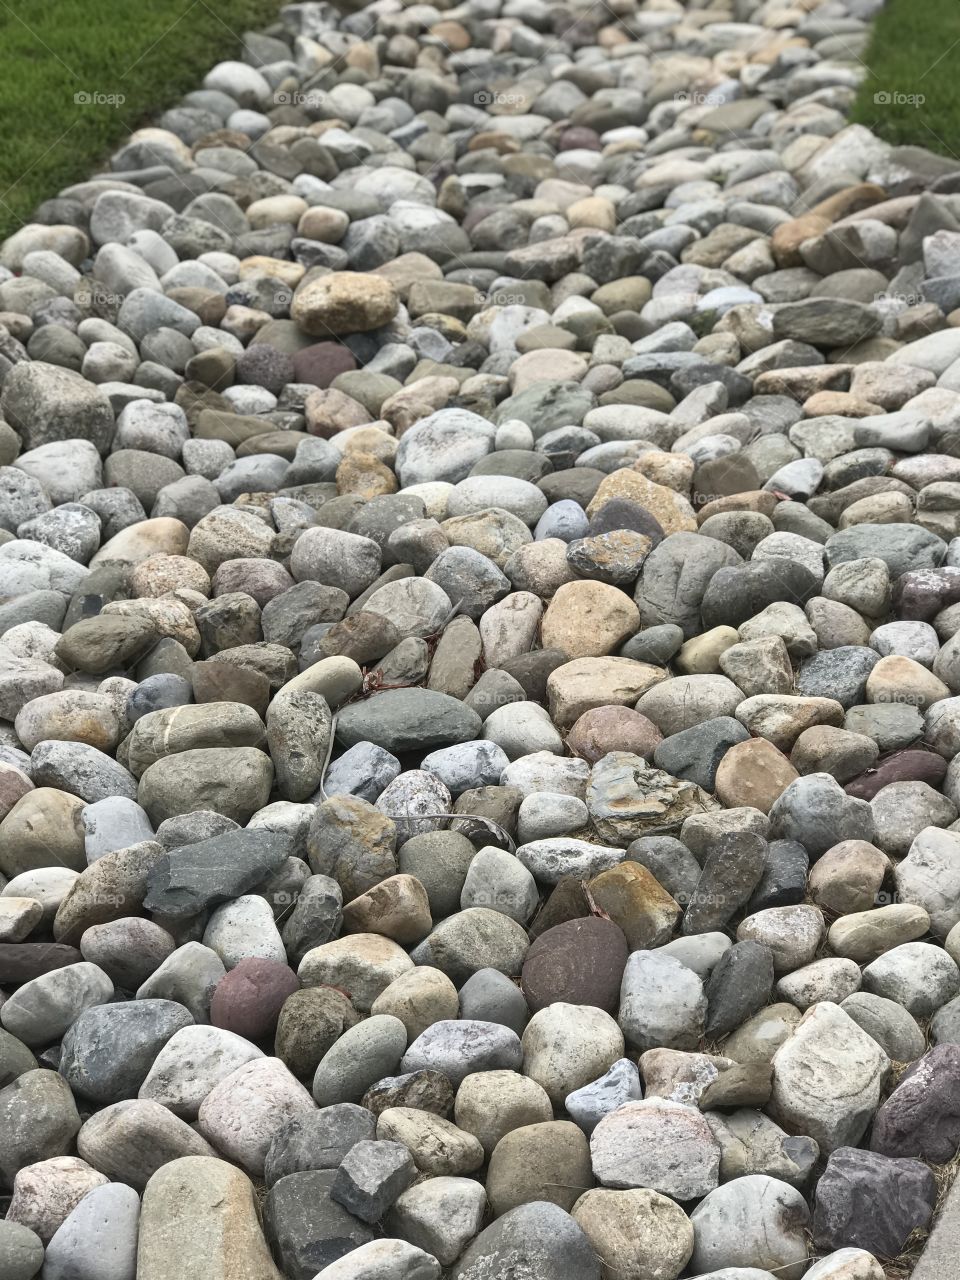 We all have a path filled with pebbles